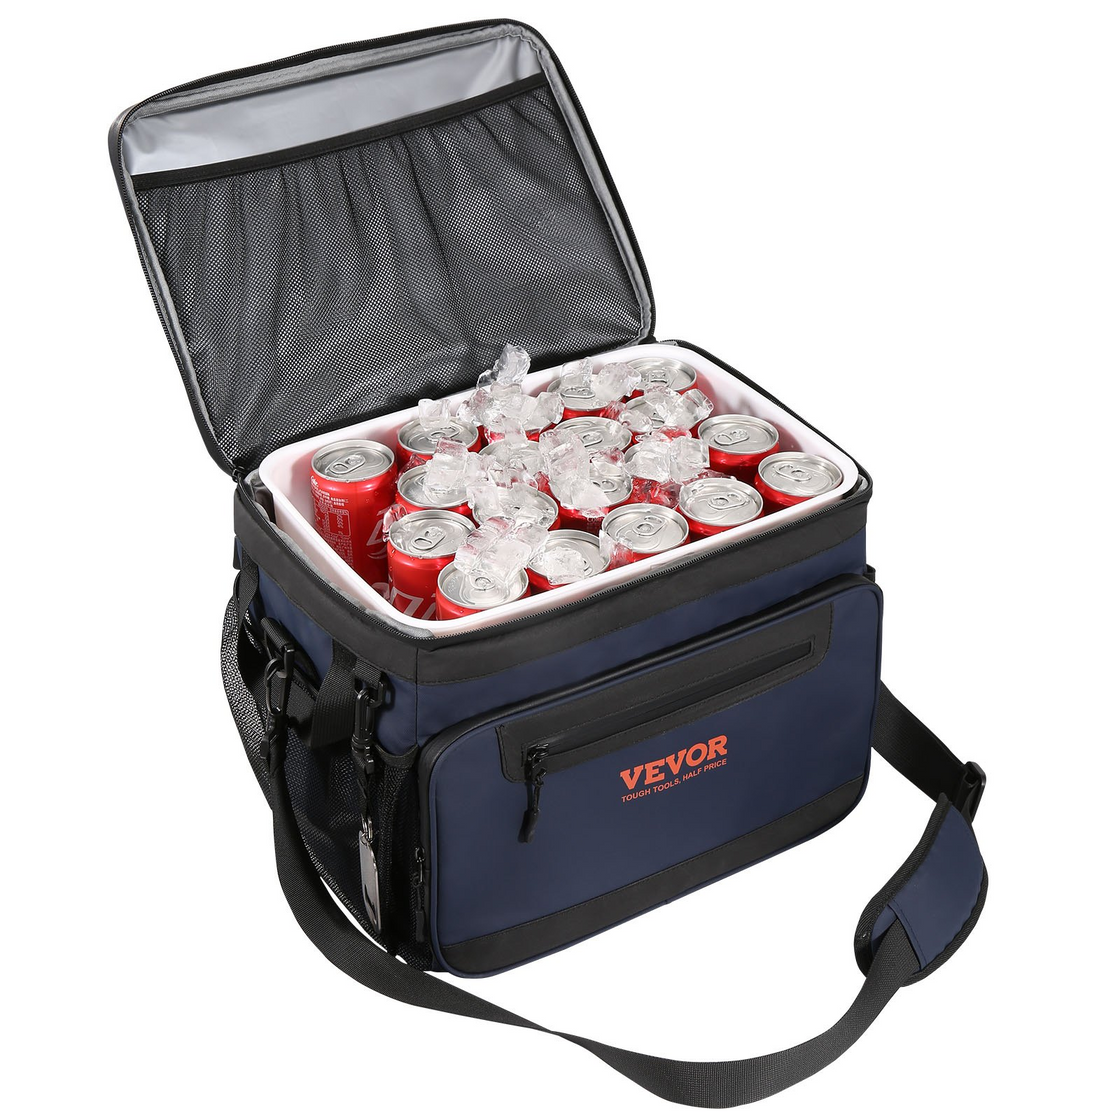 VEVOR Hardbody Cooler Bag, 30 Cans - Insulated, Leakproof, and Waterproof